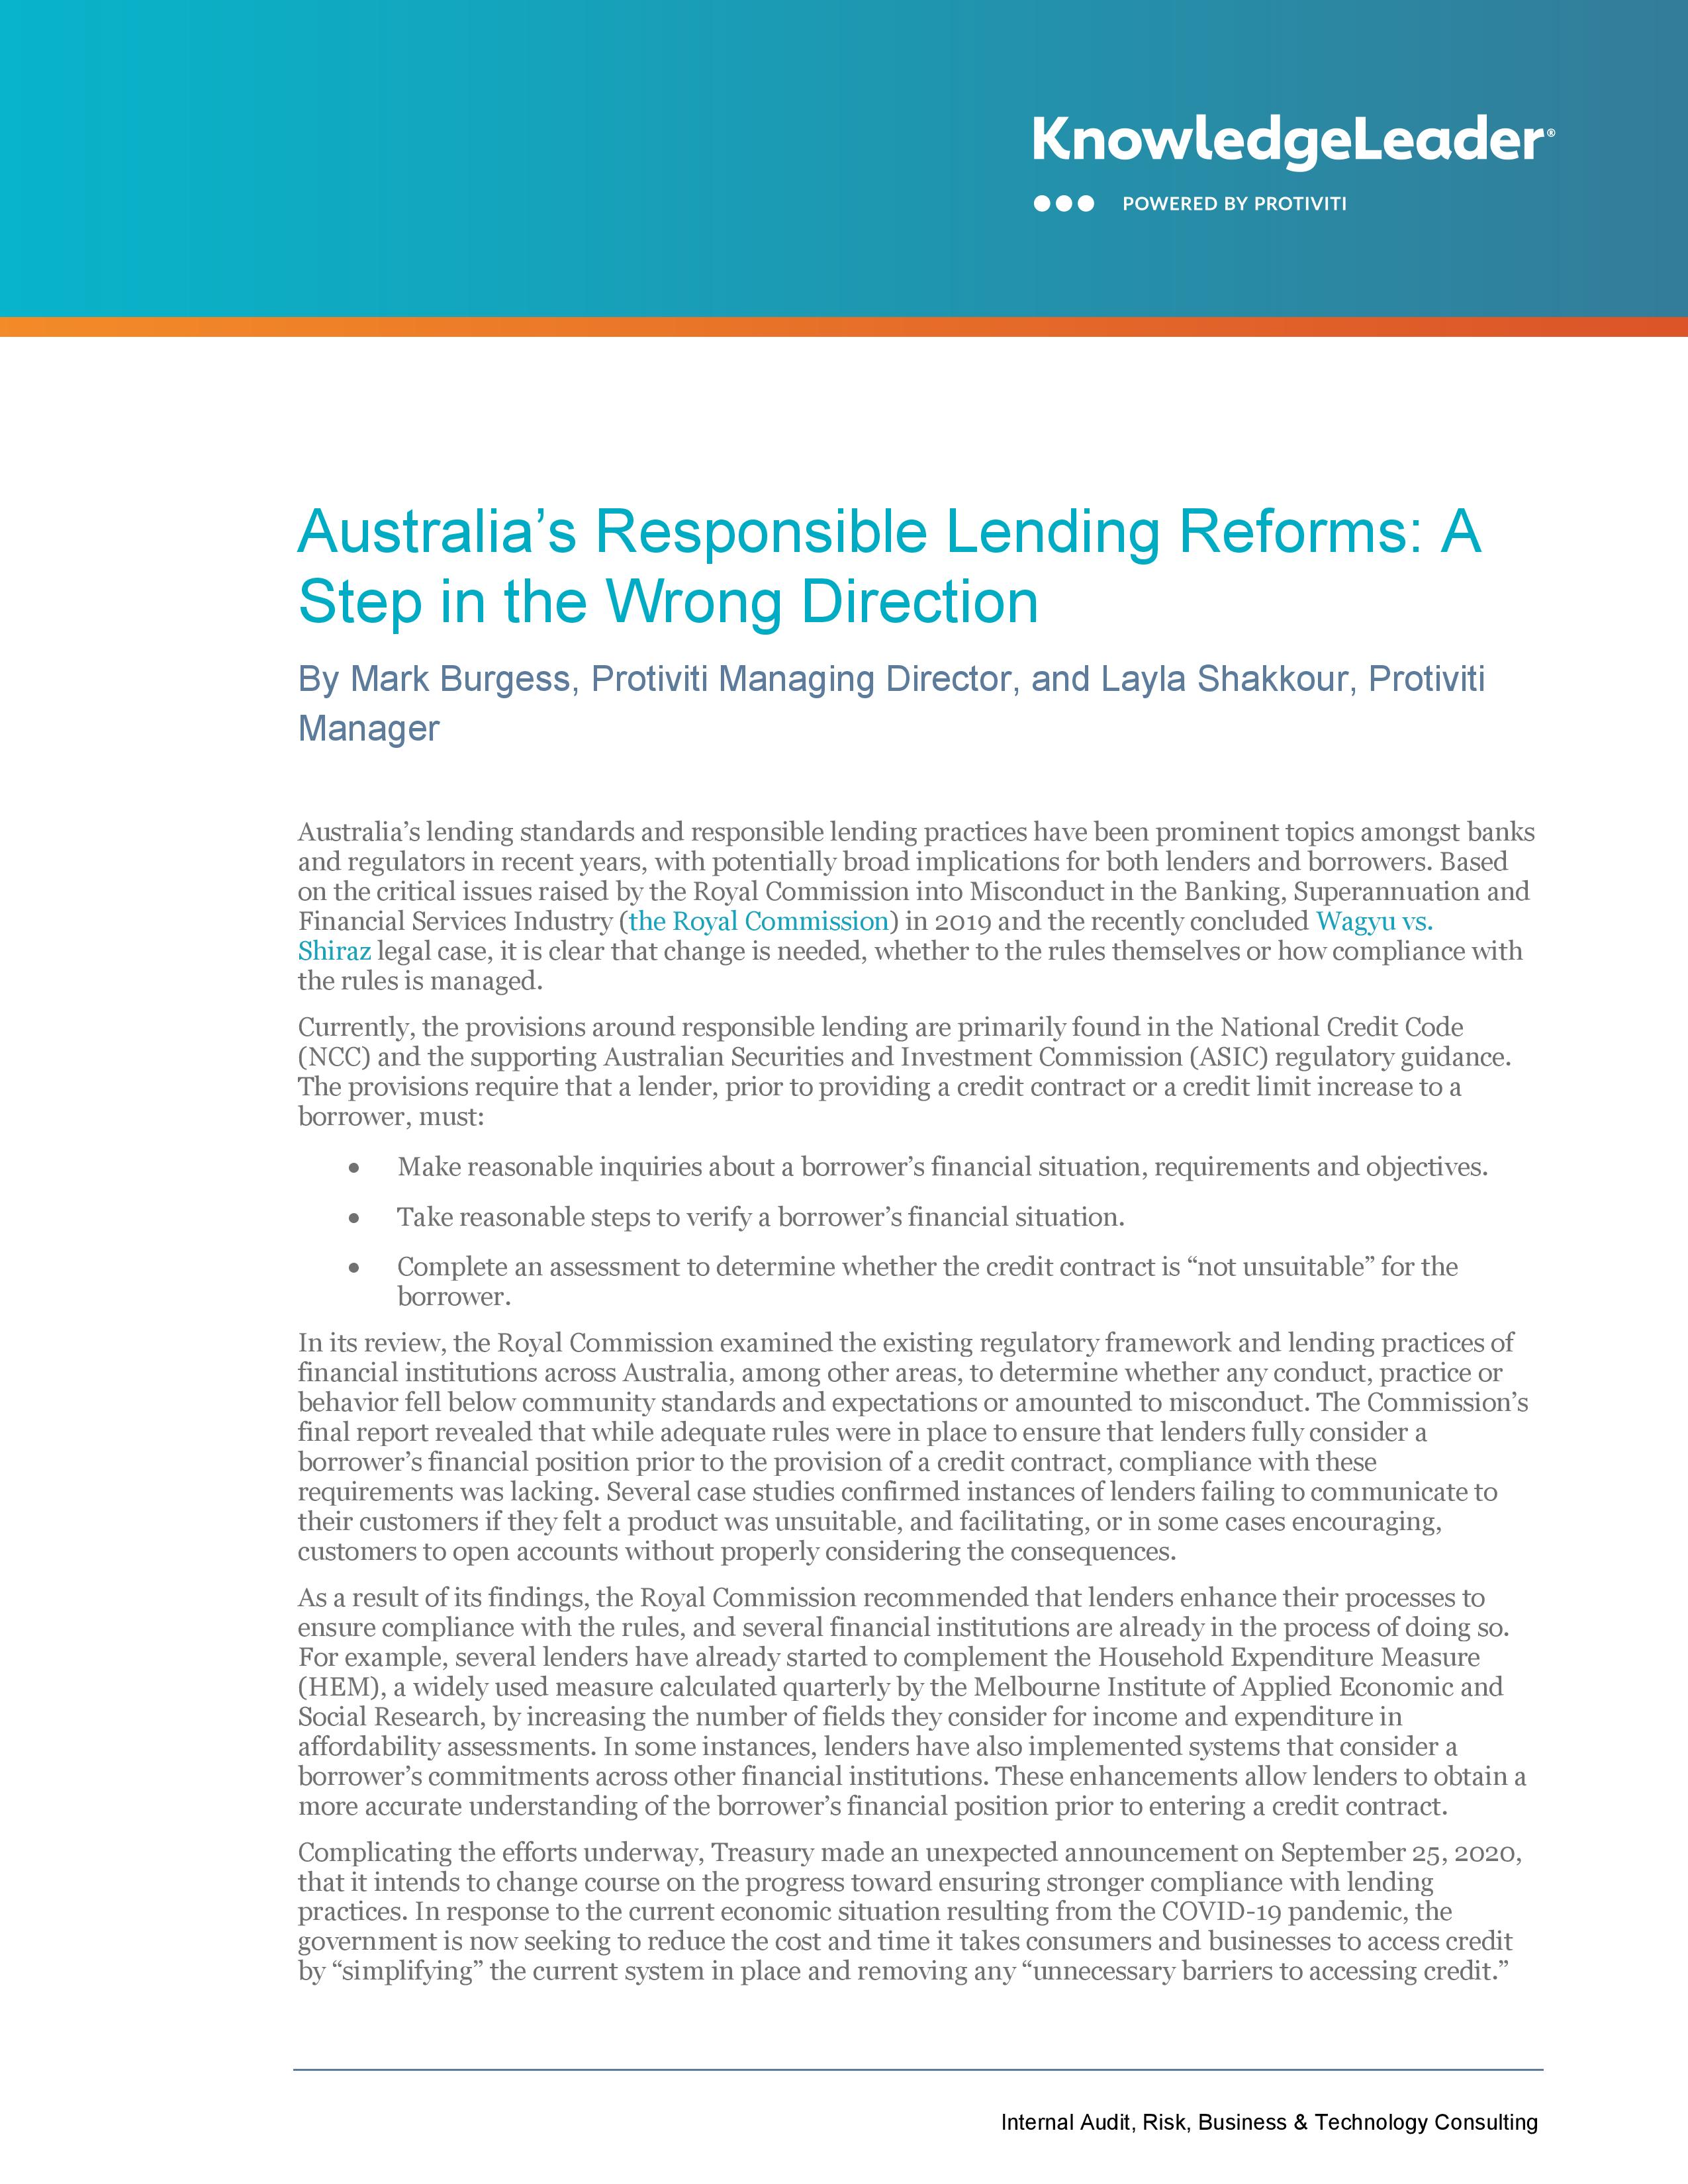 Screenshot of the first page of Australia’s Responsible Lending Reforms: A Step in the Wrong Direction